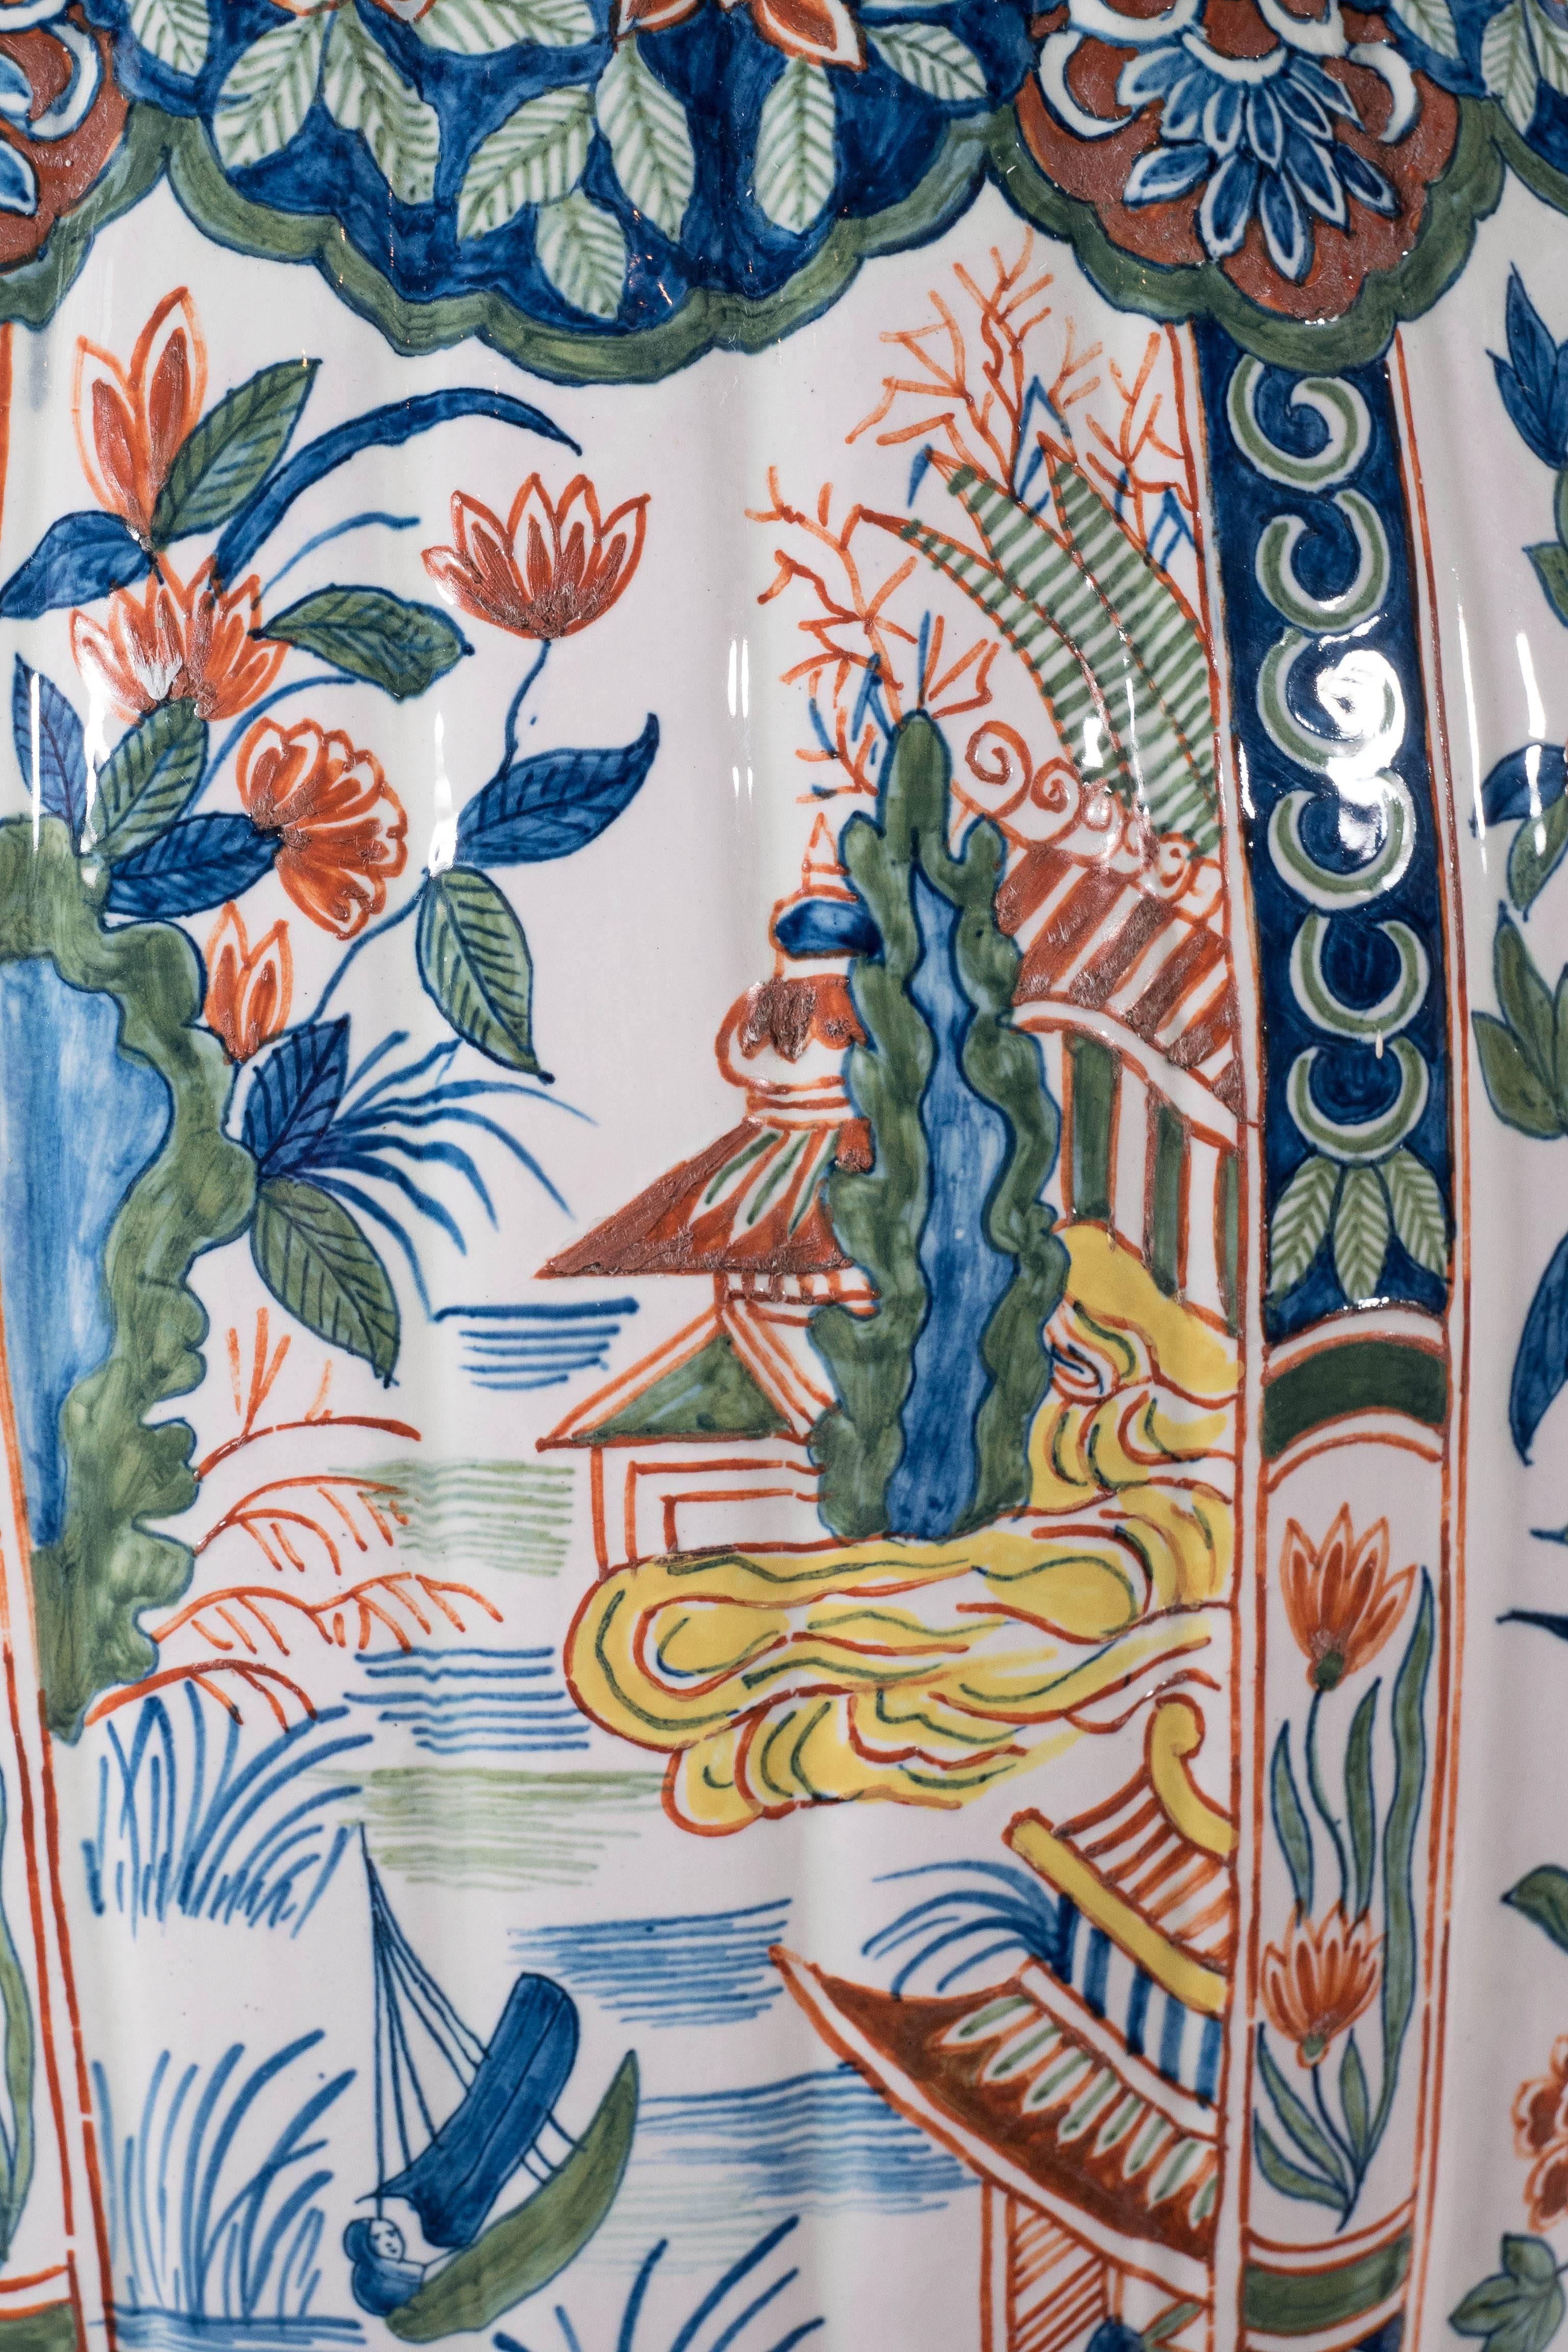 A pair of large polychrome jars with alternating panels. One panel shows a chinoiserie river scene with pavillions by the water. The other panel shows flowering branches in a garden. The vases are painted in a palette of greens, blues, orange, and